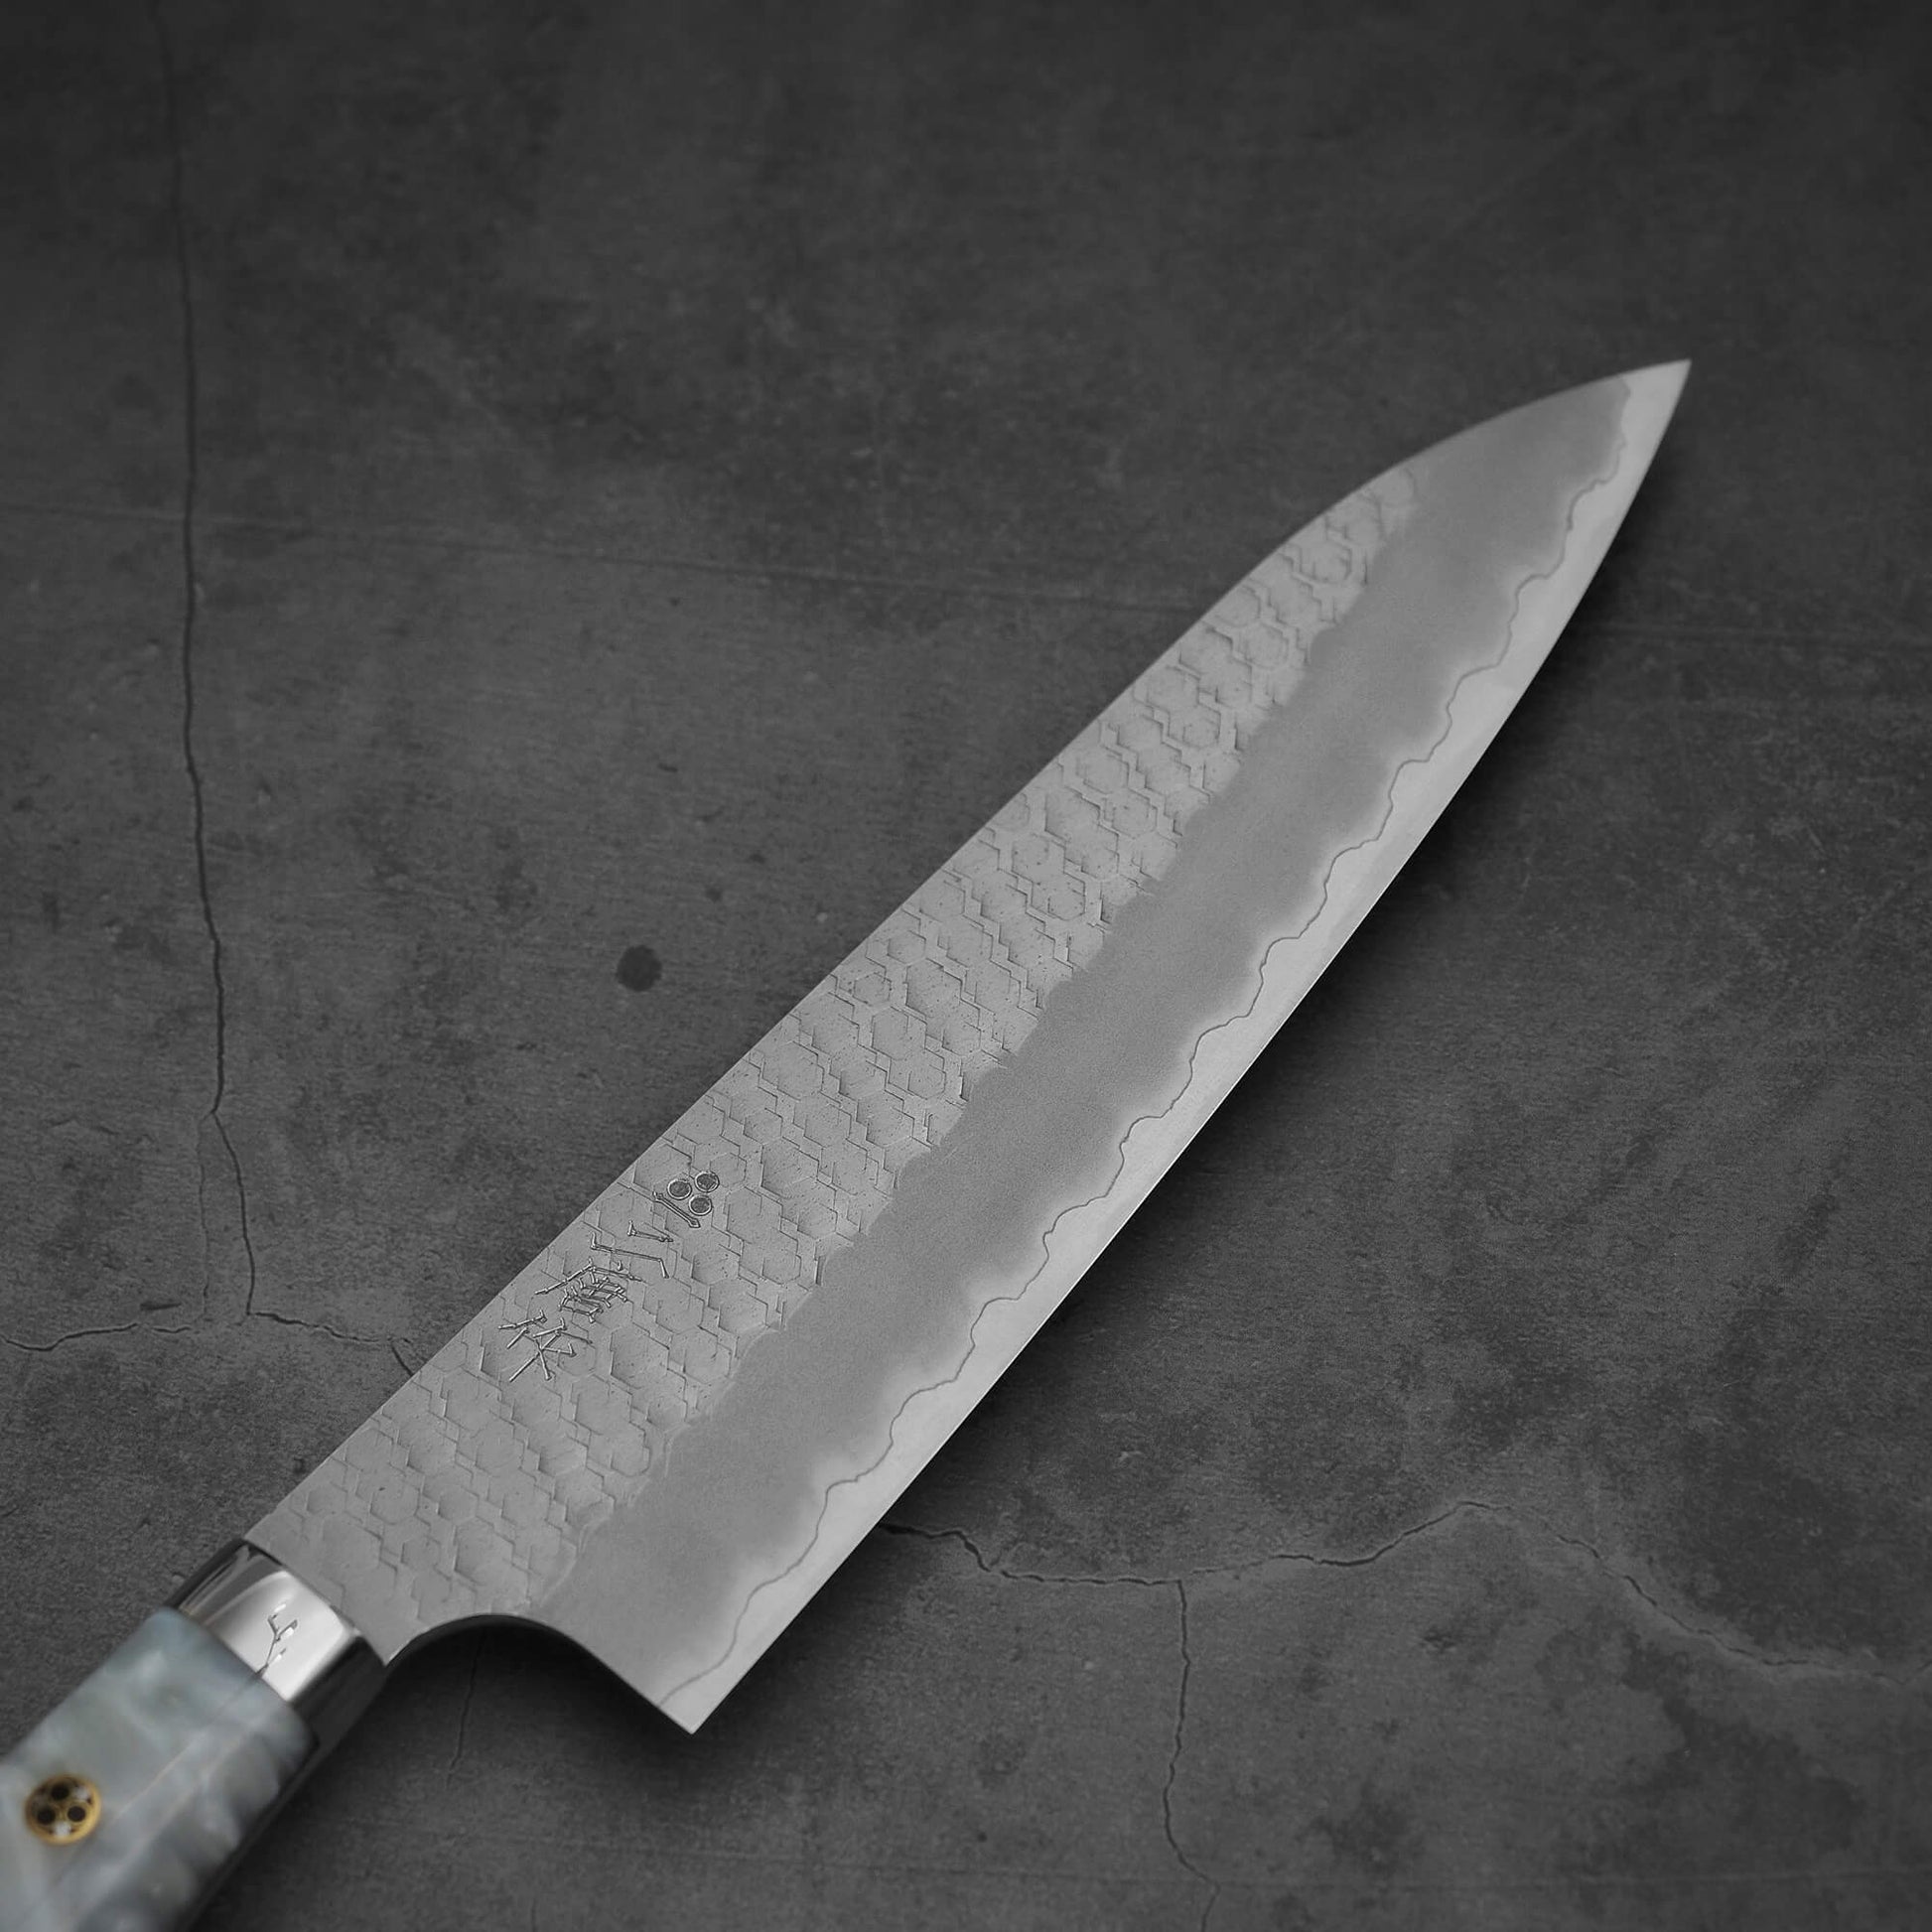 Blade view of 210mm Nigara tsuchime SG2 gyuto knife with pearl handle resin